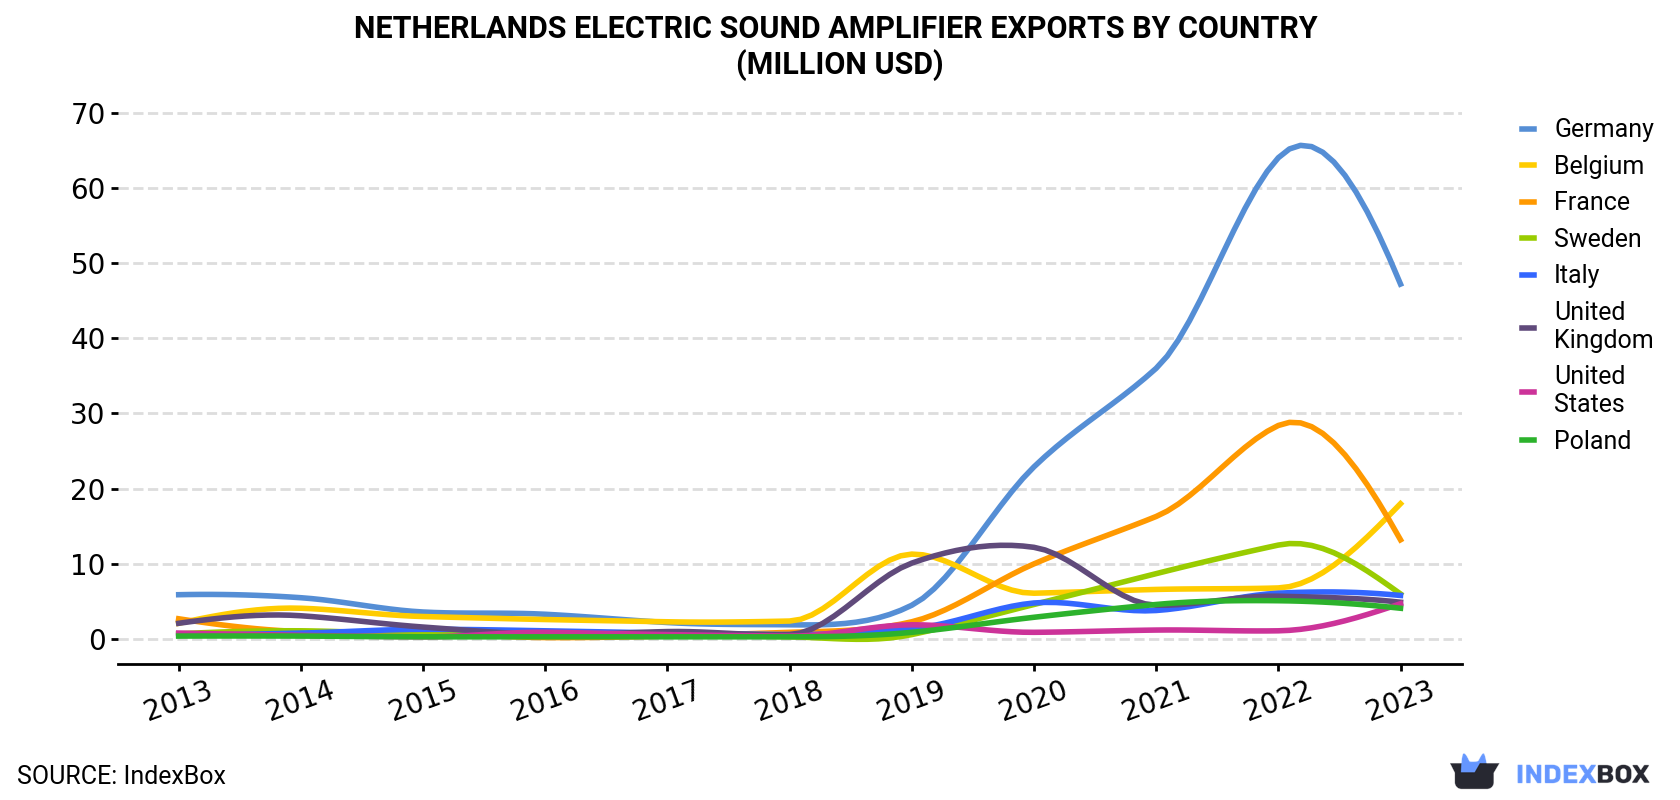 Netherlands Electric Sound Amplifier Exports By Country (Million USD)